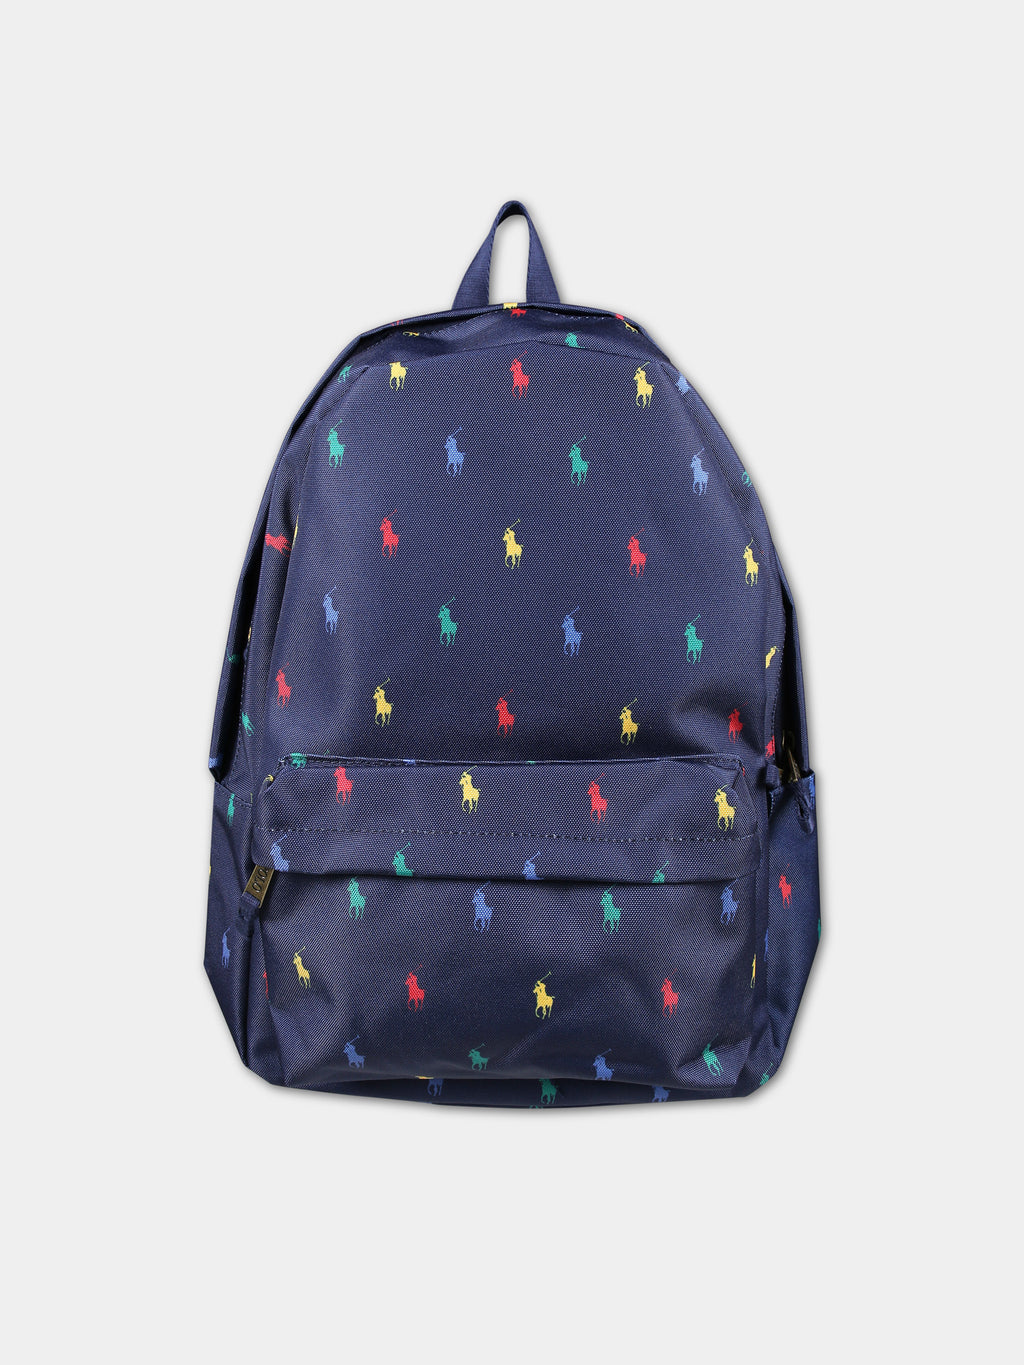 Blue backpack for kids with pony logos